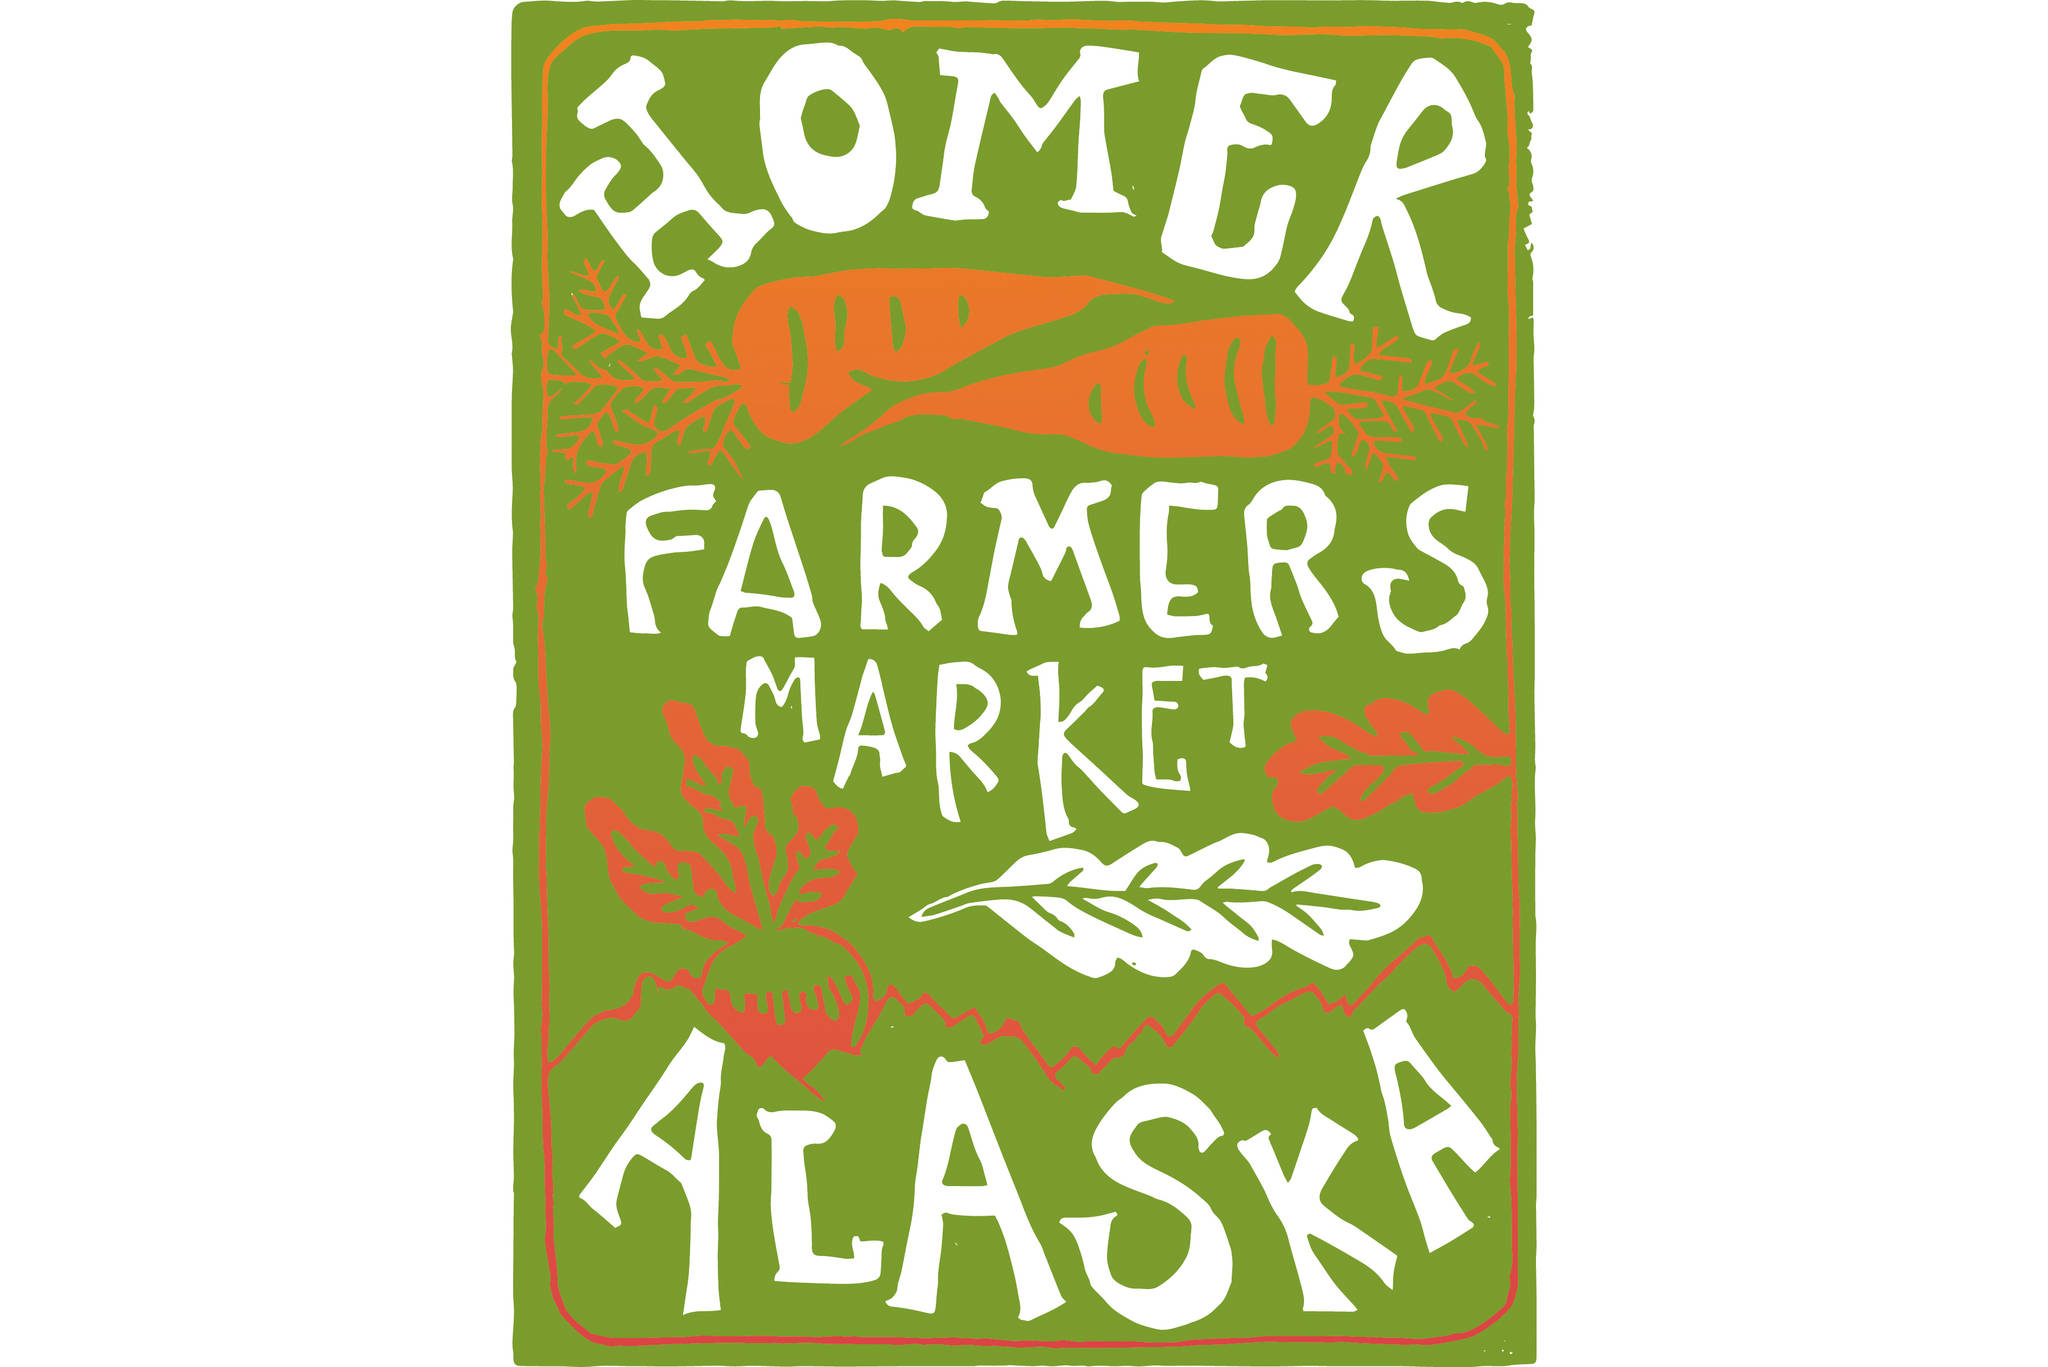 Homer Farmers Market: It’s amazing at the Market in food and photos